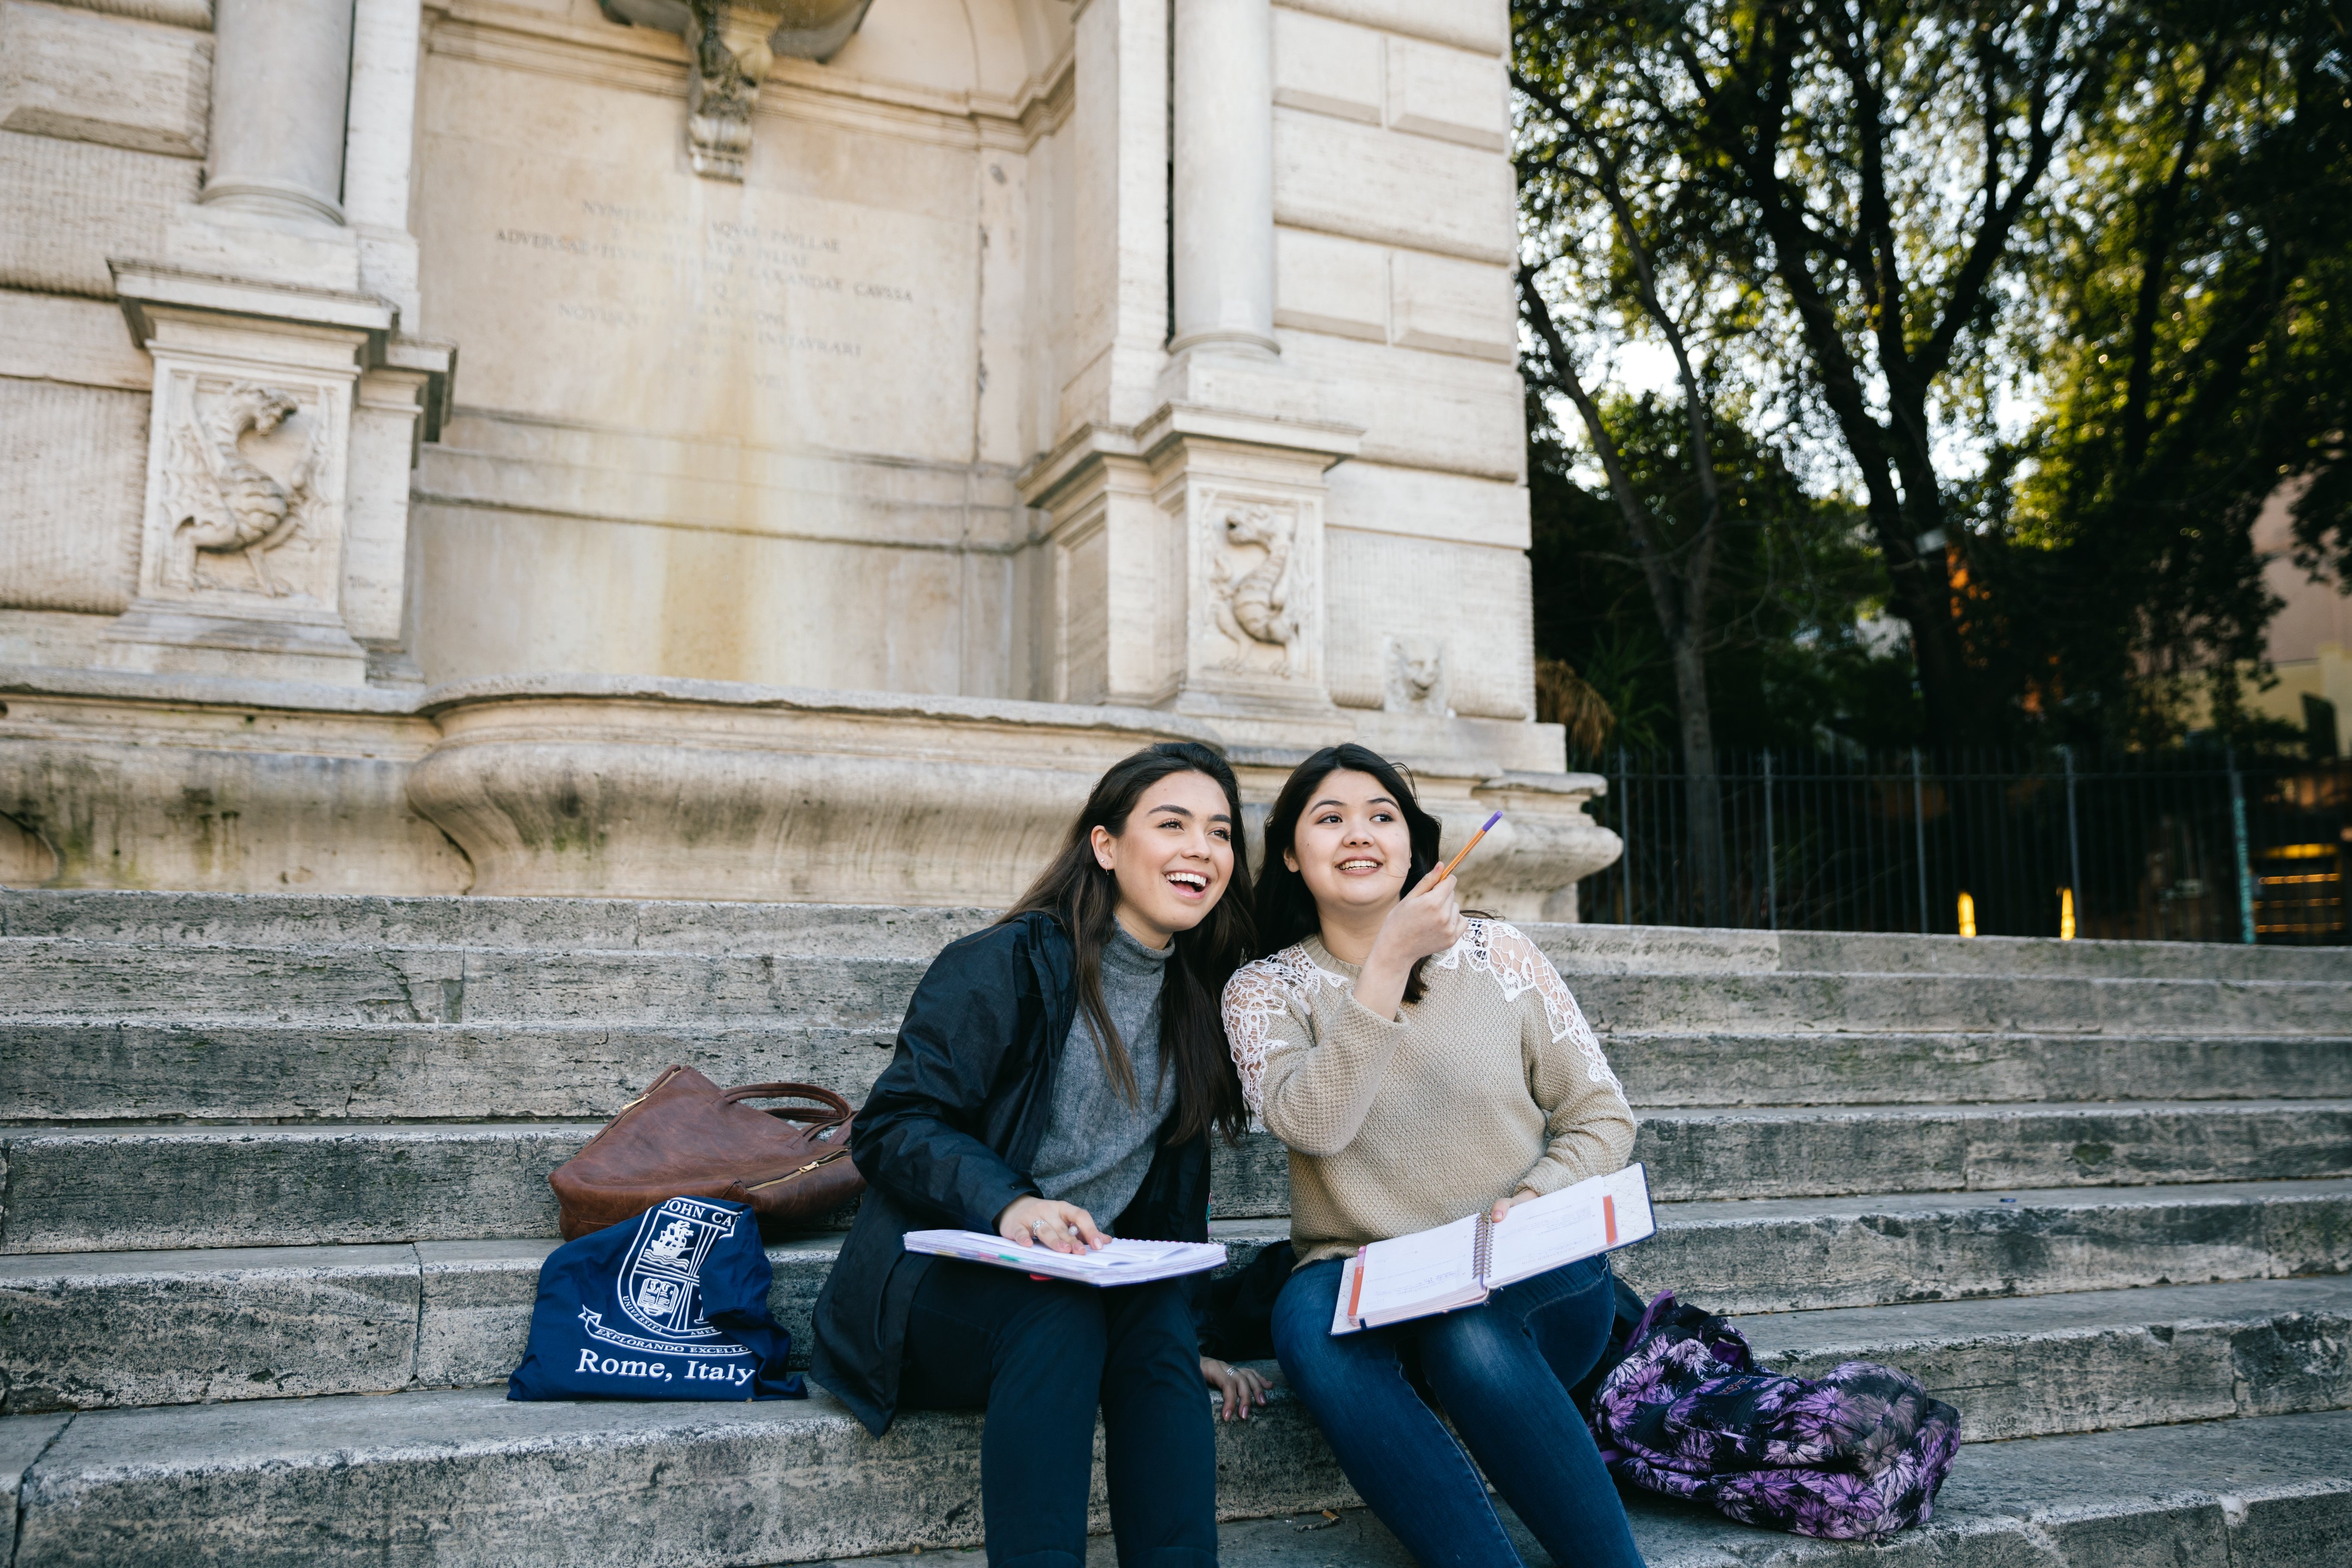 May 3 study abroad in Italy